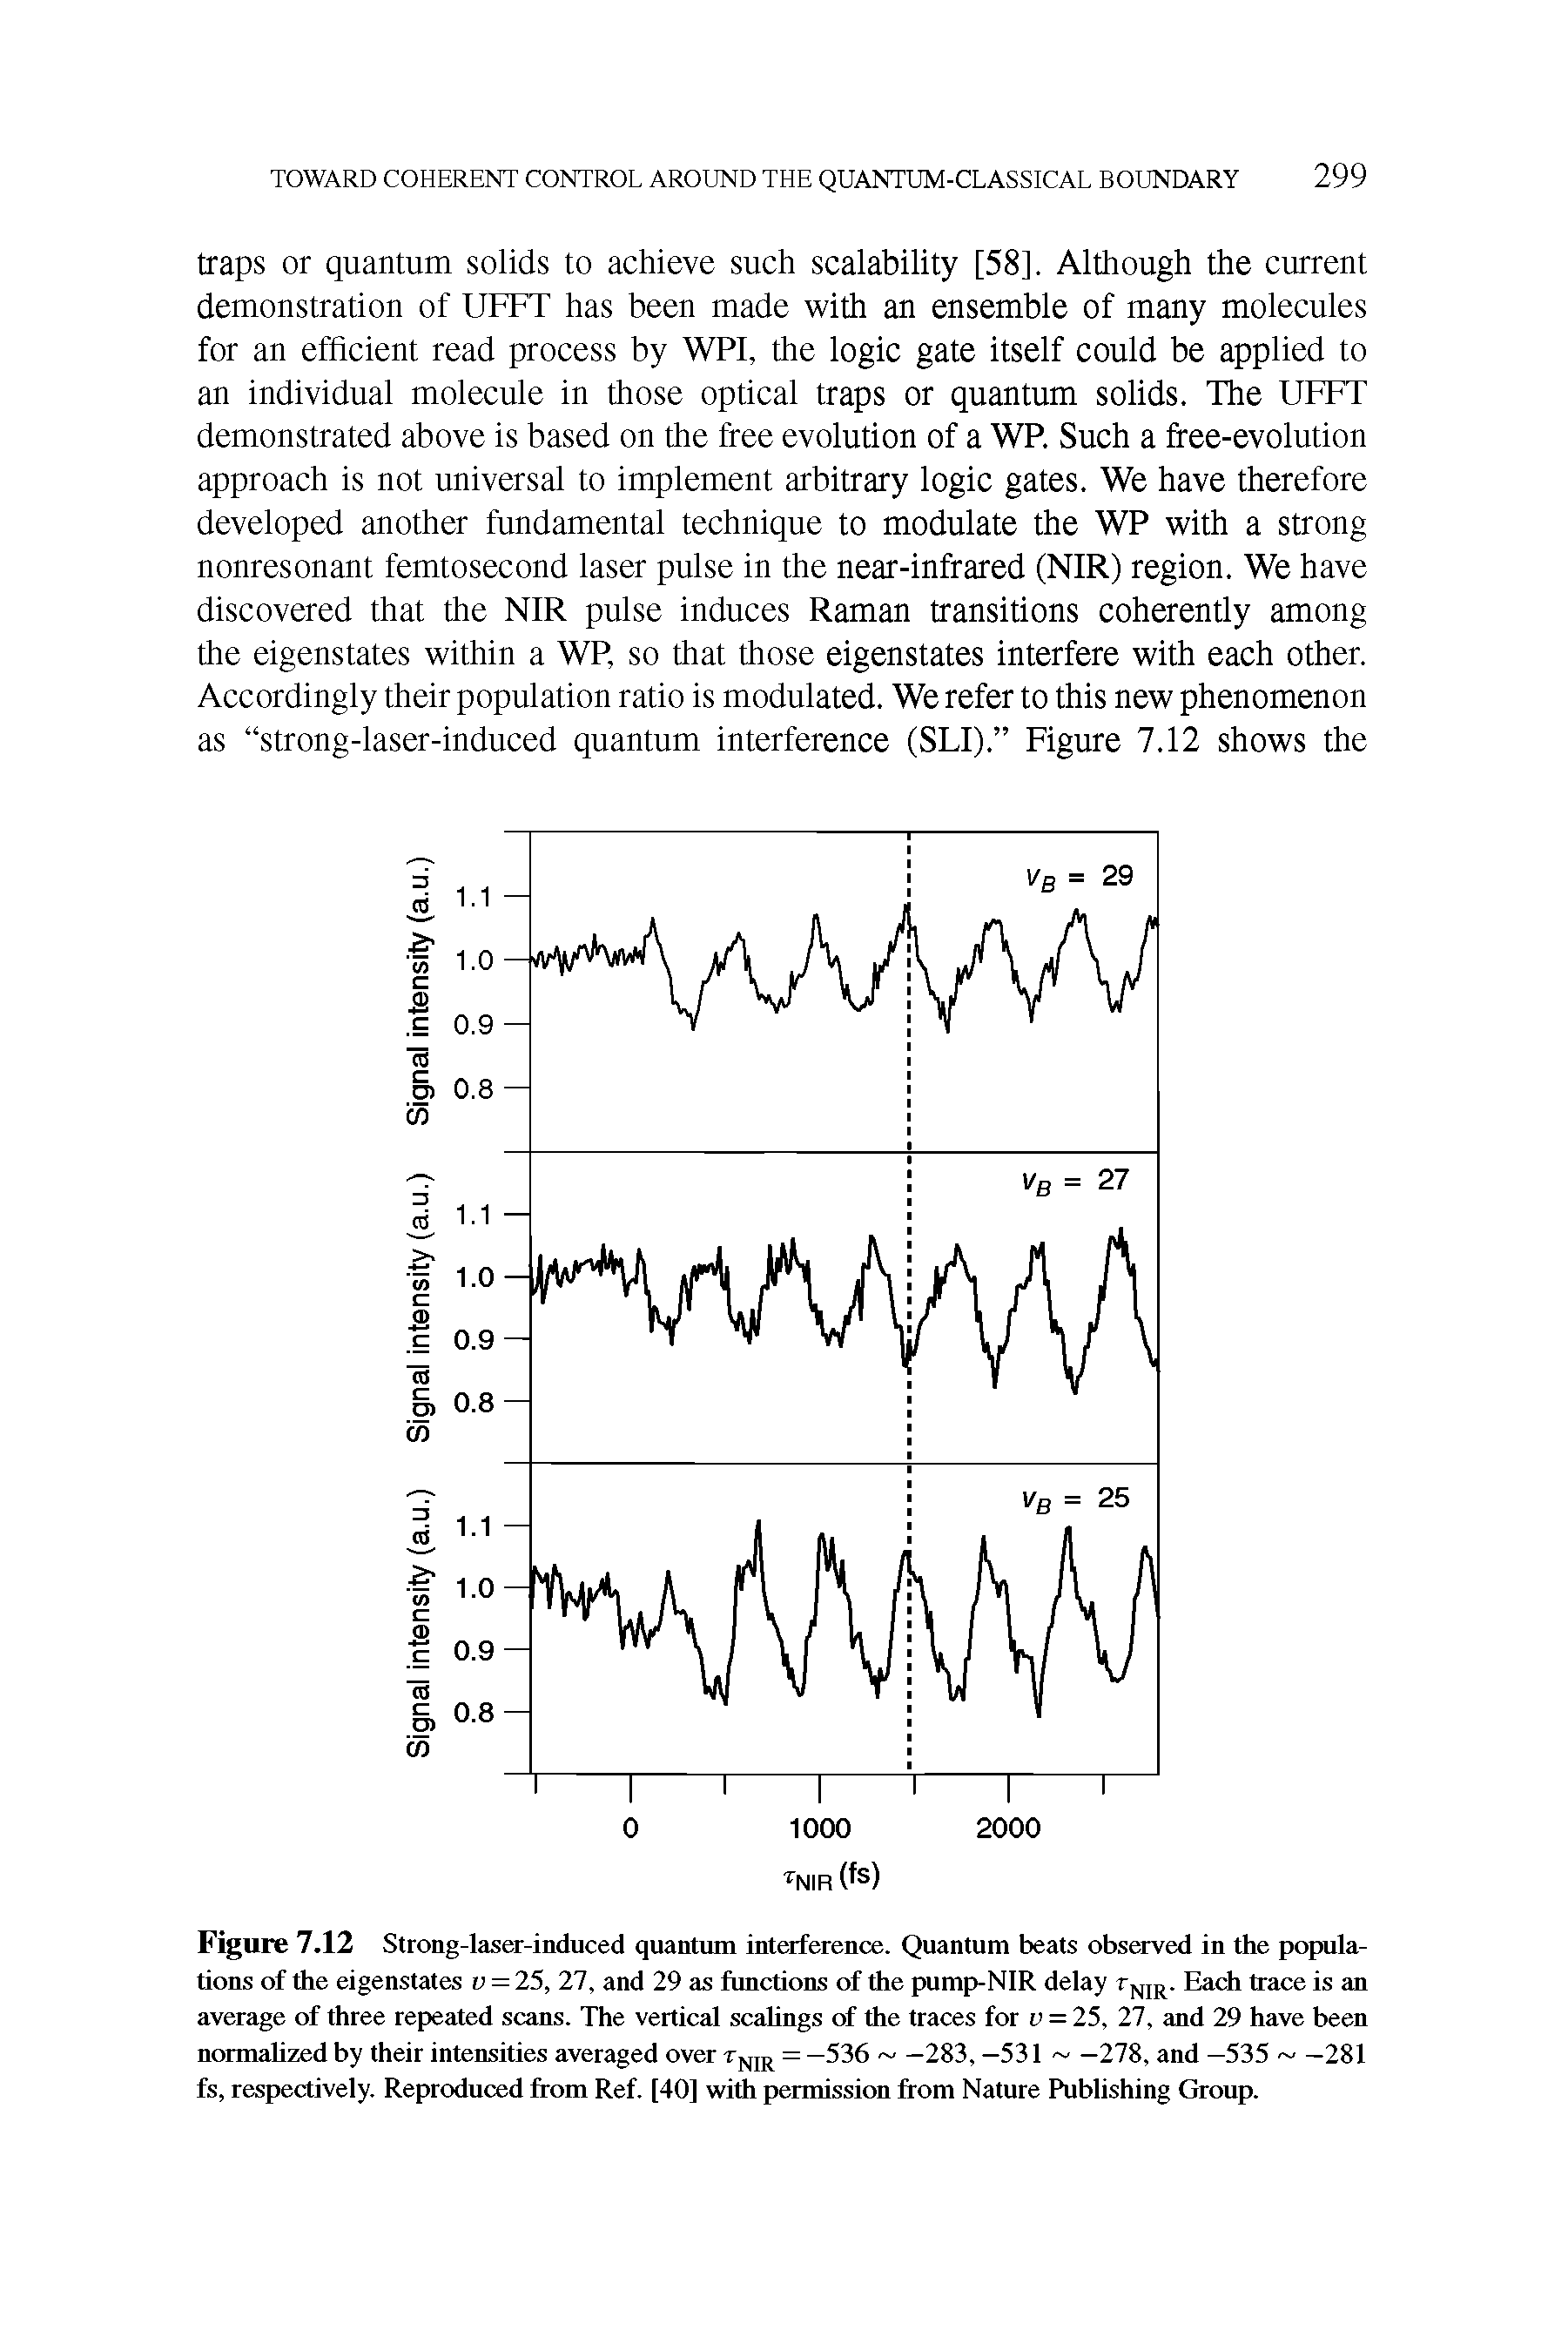 Figure 7.12 Strong-laser-induced quantum interference. Quantum beats observed in the populations of the eigenstates v = 25, 27, and 29 as functions of the pump-NlR delay Tfjjjj. Each trace is an average of three repeated scans. The vertical scahngs of the traces for v = 25, 27, and 29 have been normahzed by their intensities averaged over Tpjjjj = —536 —283, —531 —278, and —535 —281 fs, respectively. Reproduced from Ref. [40] with permission from Nature Publishing Group.